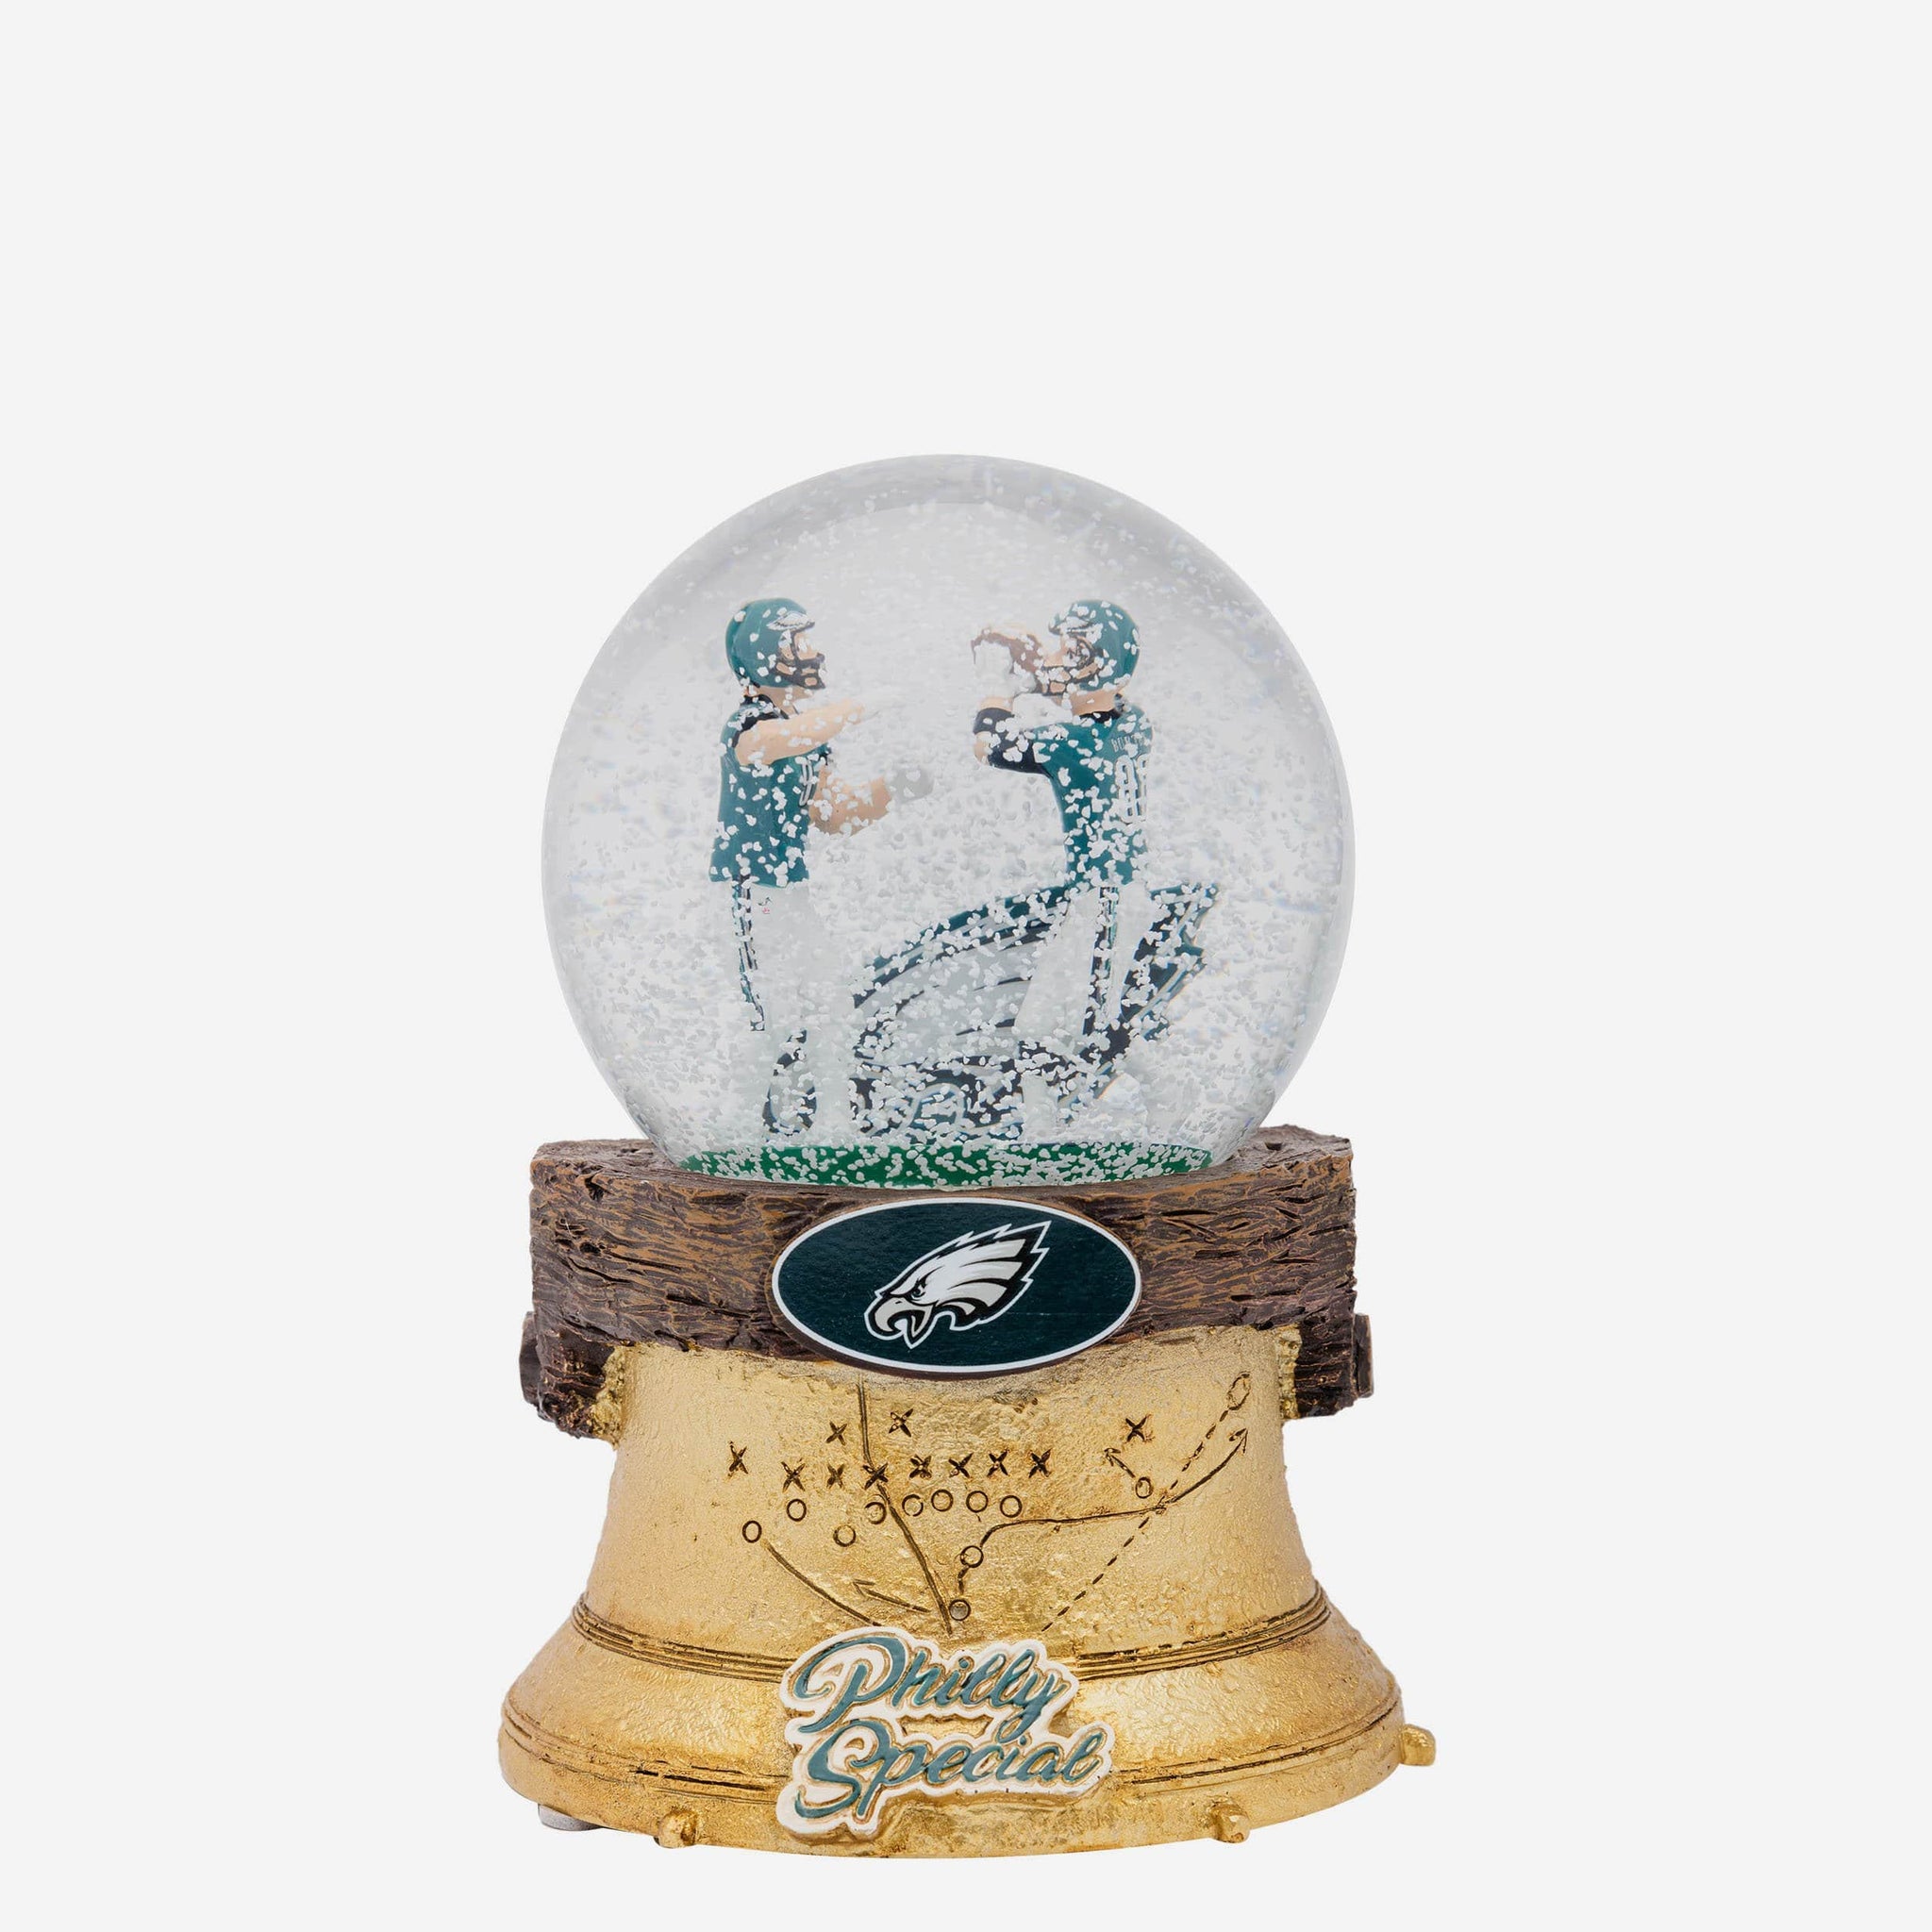 The Philly Special - Colts Sports Collectibles